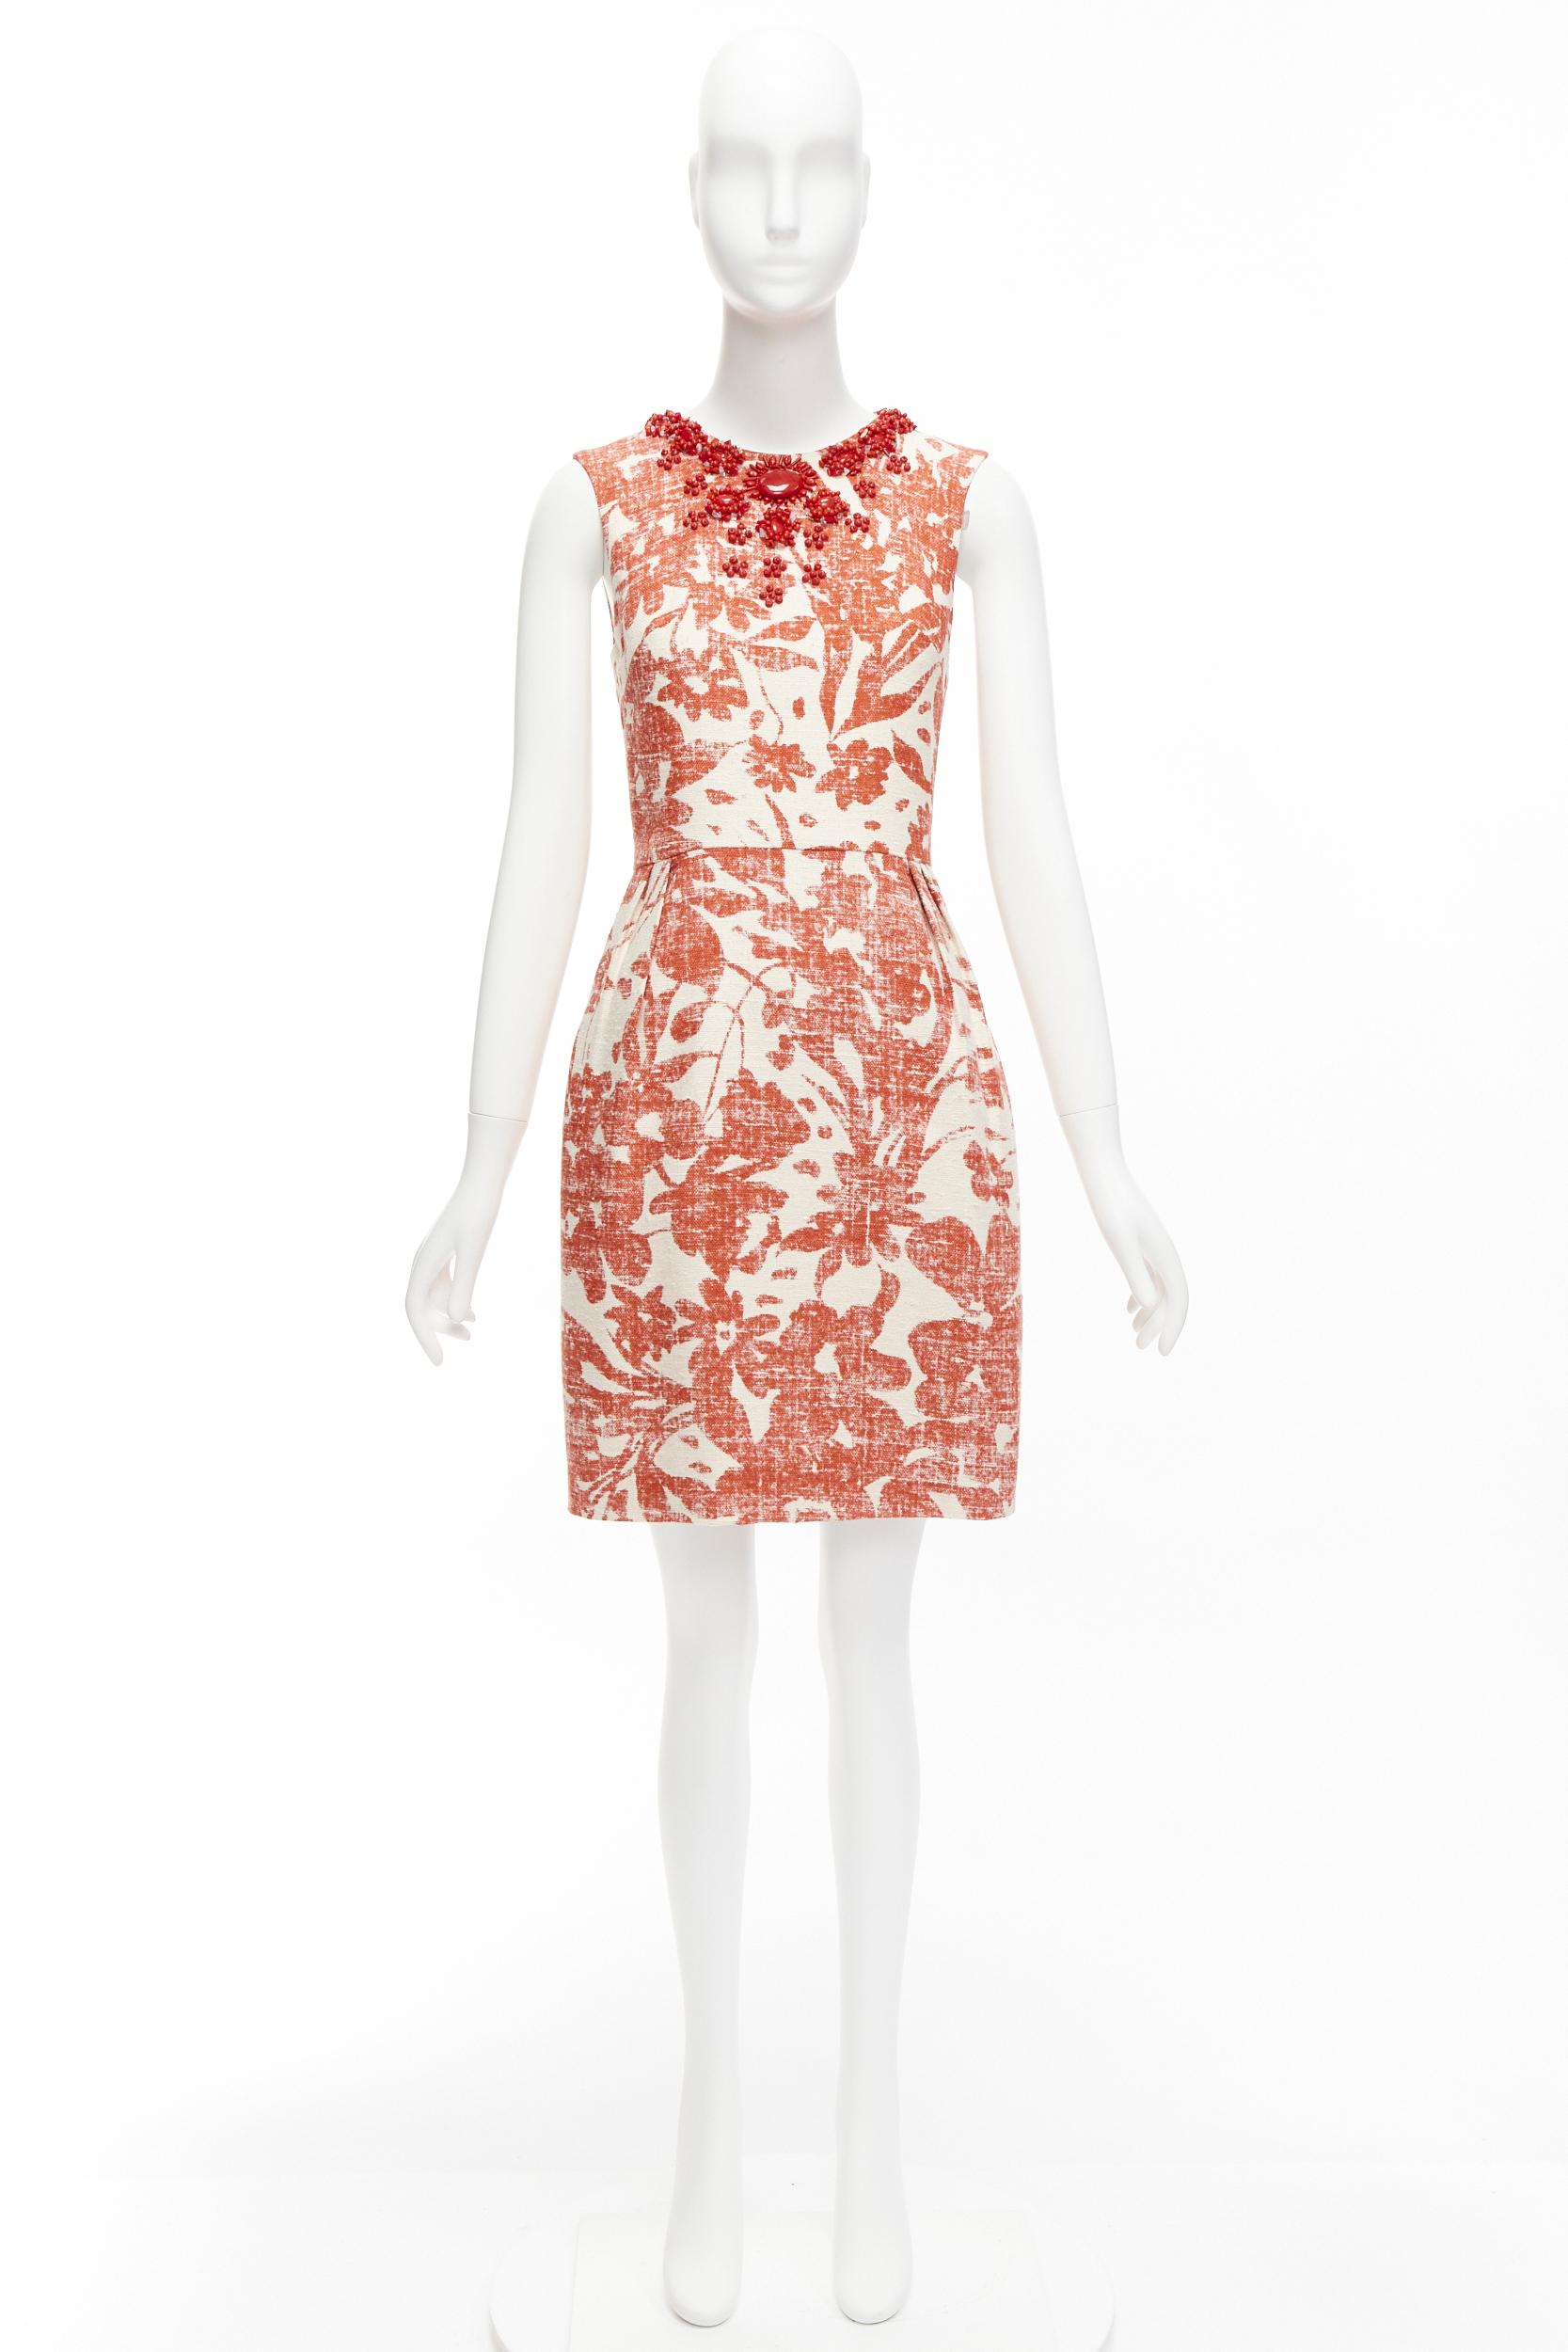 MONIQUE LHUILLIER cream red floral embellished collar sheath dress For Sale 5